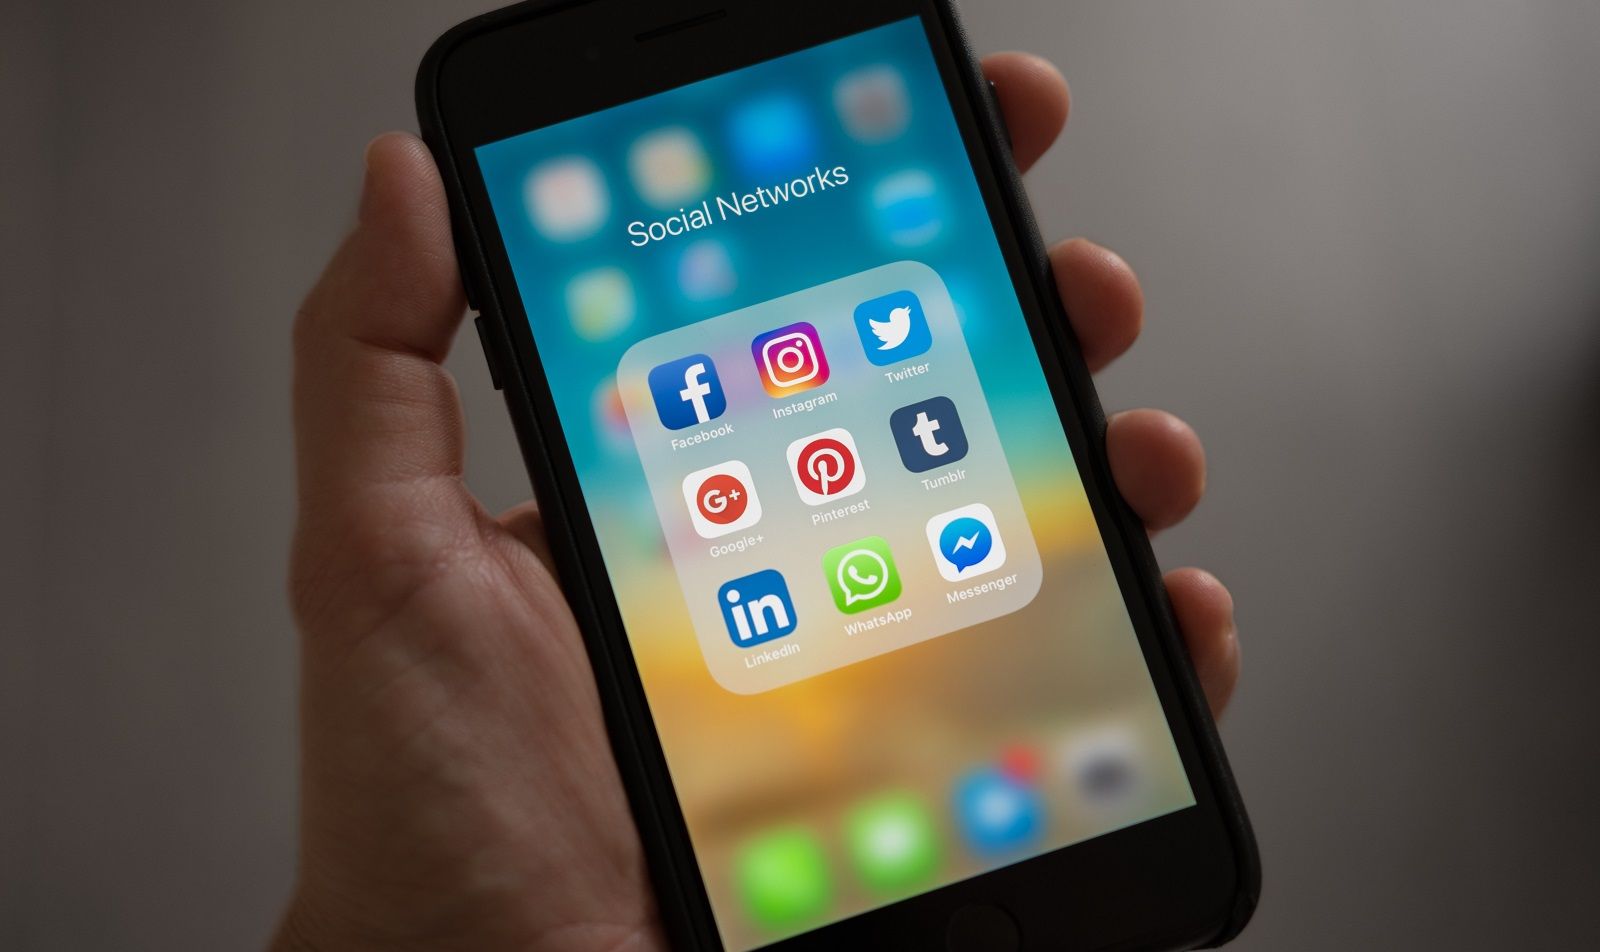 social media apps on your phone